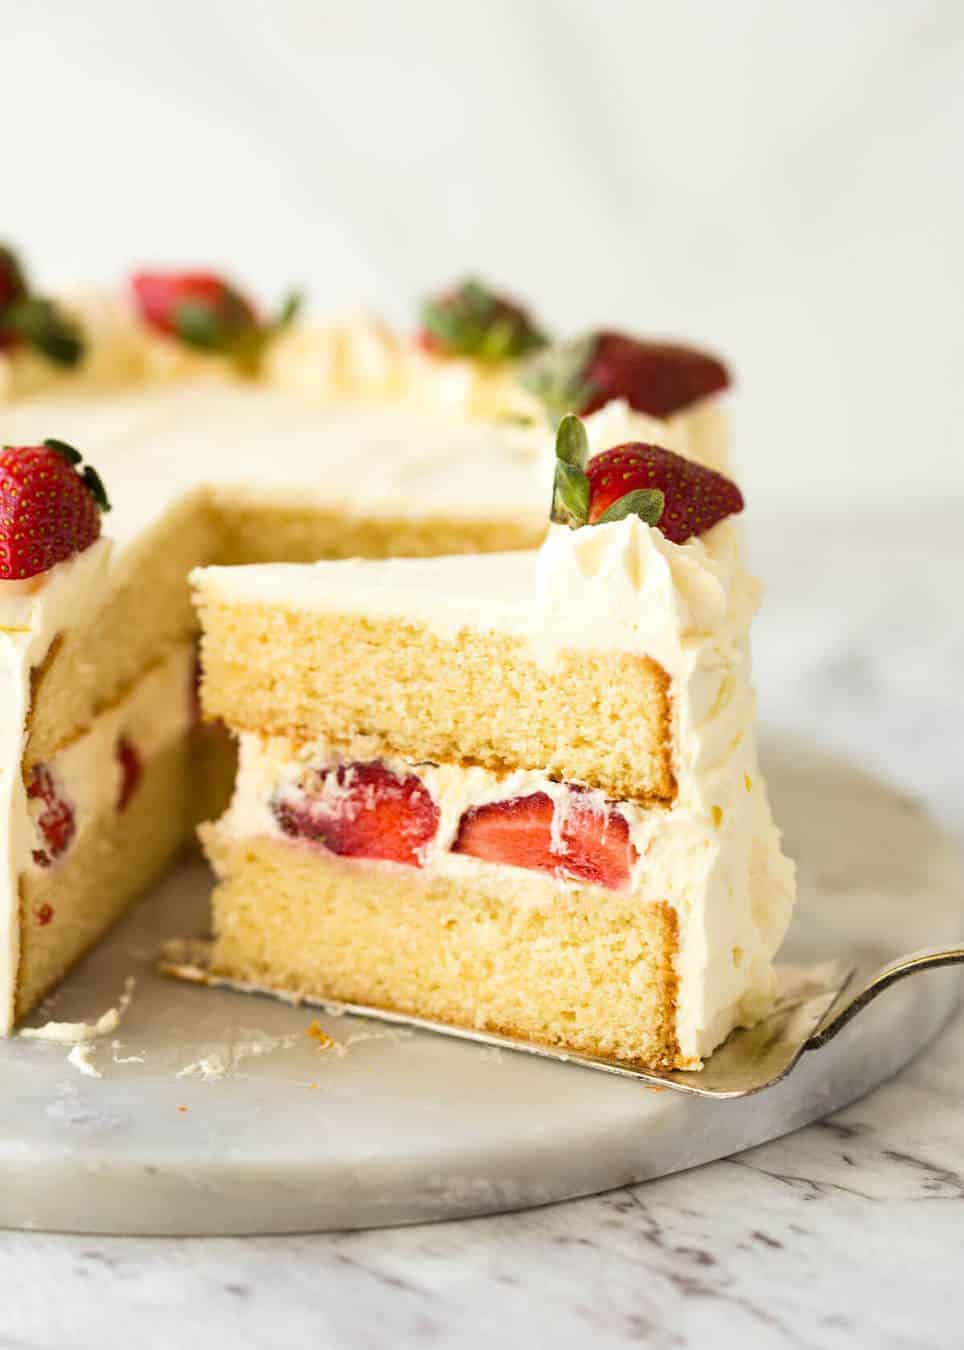 Top 22 Sponge Cake Recipes - Best Recipes Ideas and Collections